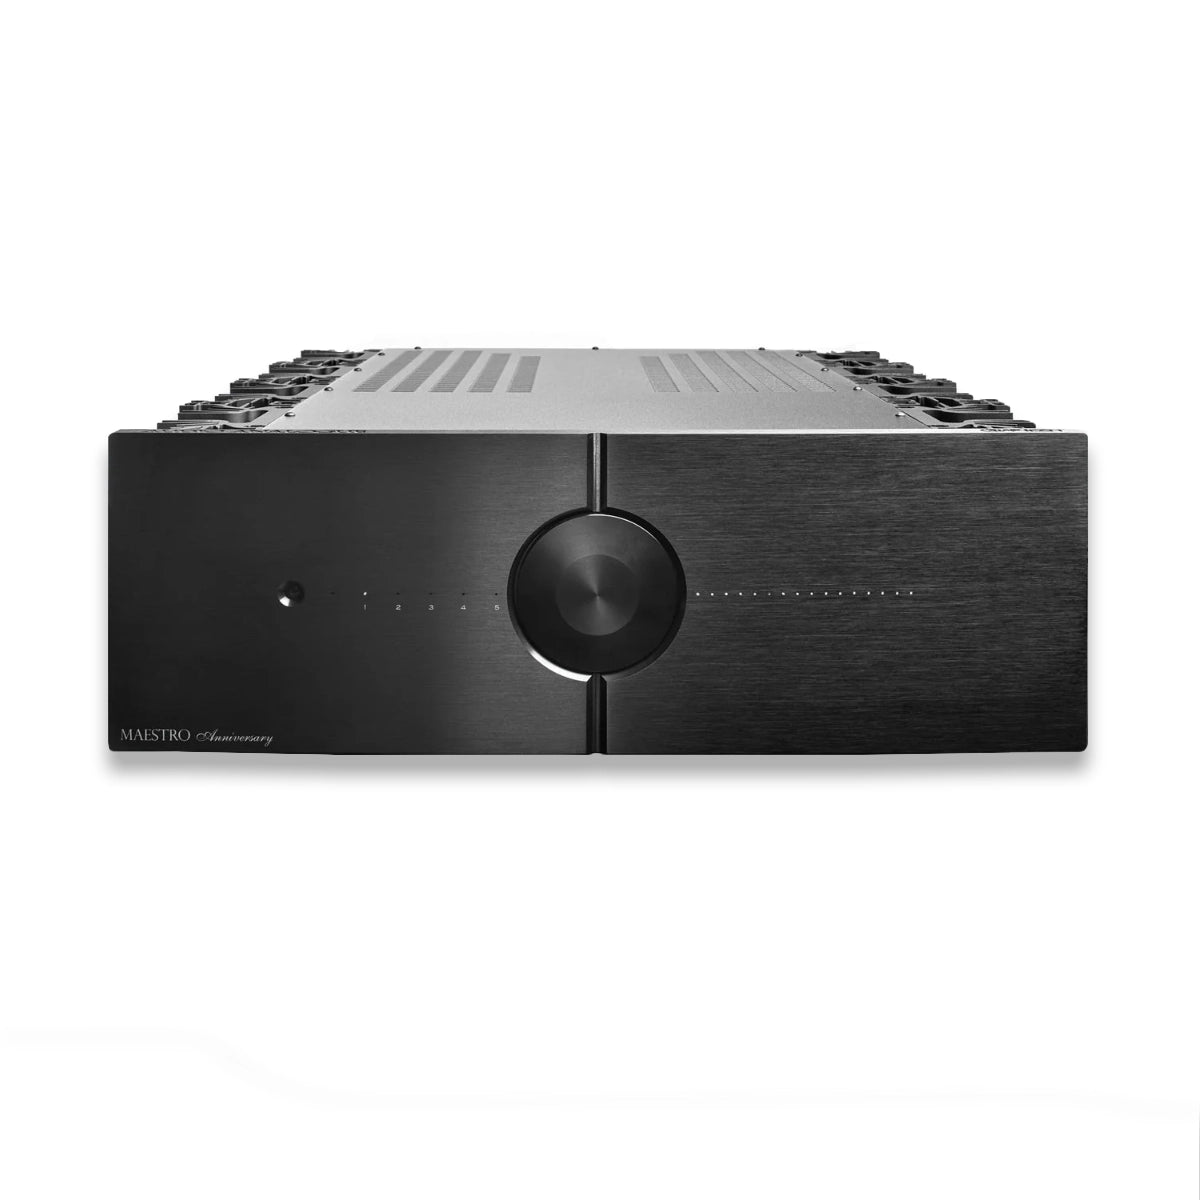 An image of Audio Analogue's Maestro 150W Integrated Amplifier in black finish, RR Version.